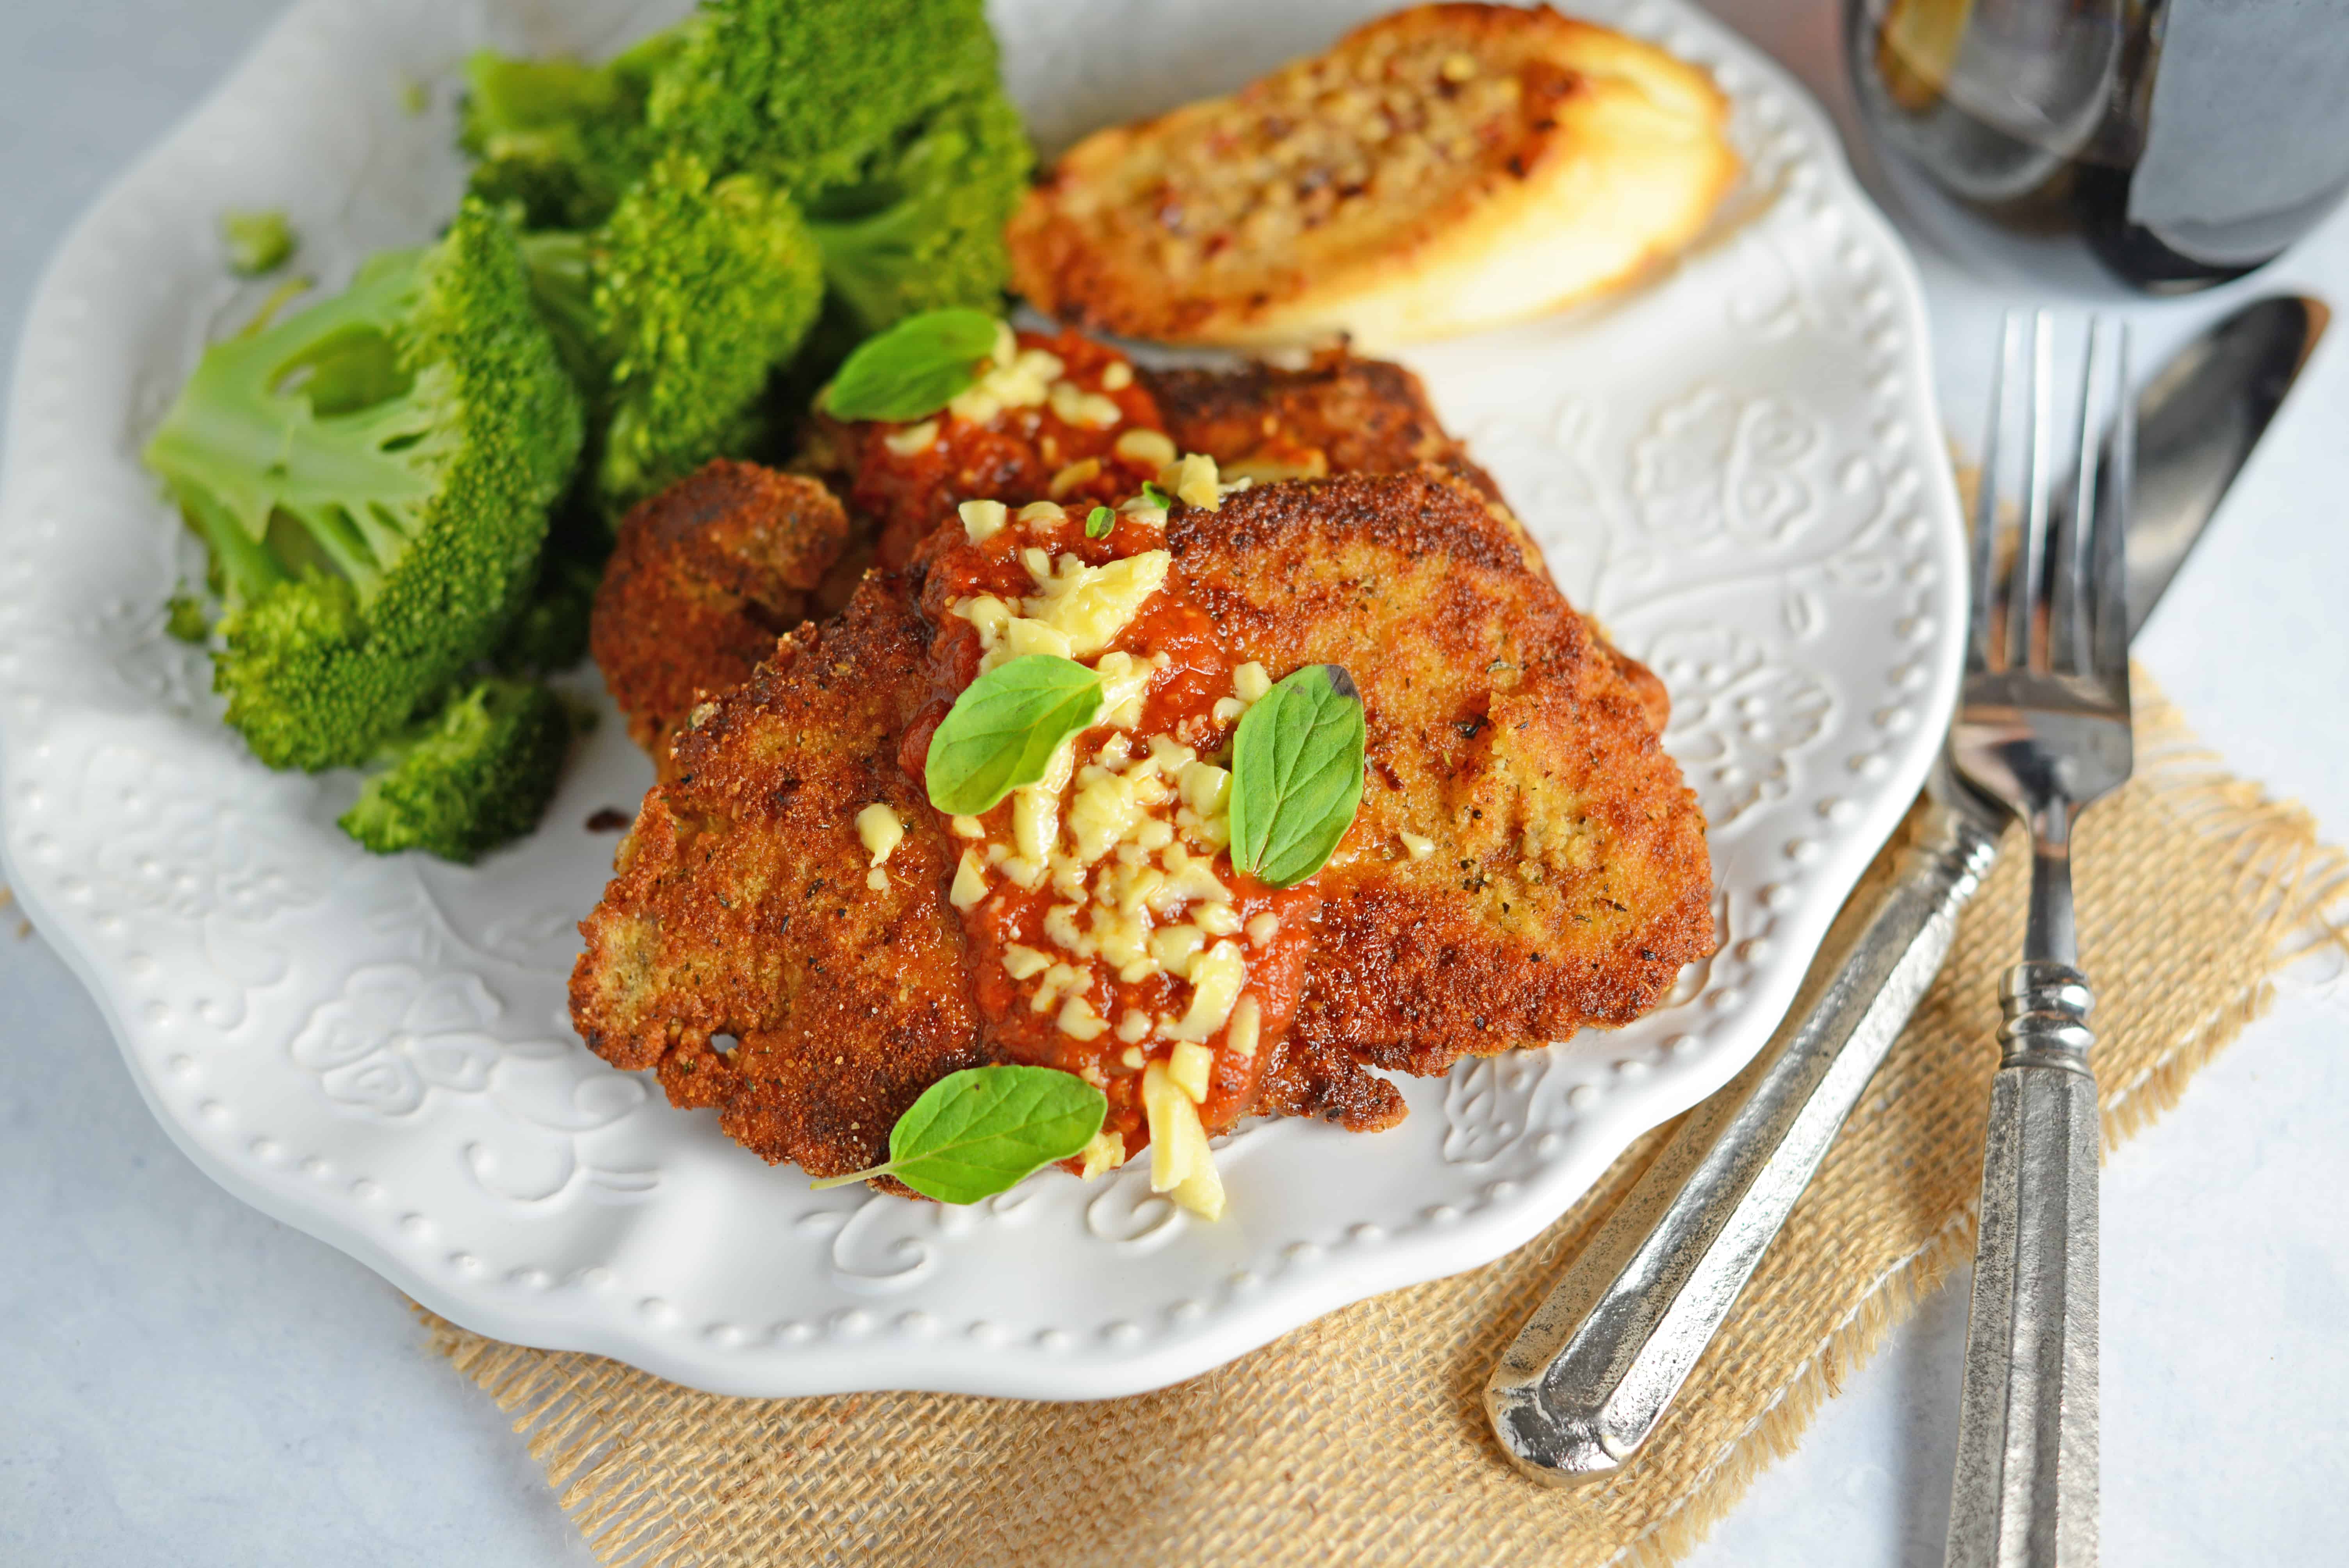 Chicken Parmesan Recipe- The BEST Chicken Parmesan. Chicken cutlets are a quick and easy 30 minute weeknight meal everyone will love! www.savoryexperiments.com